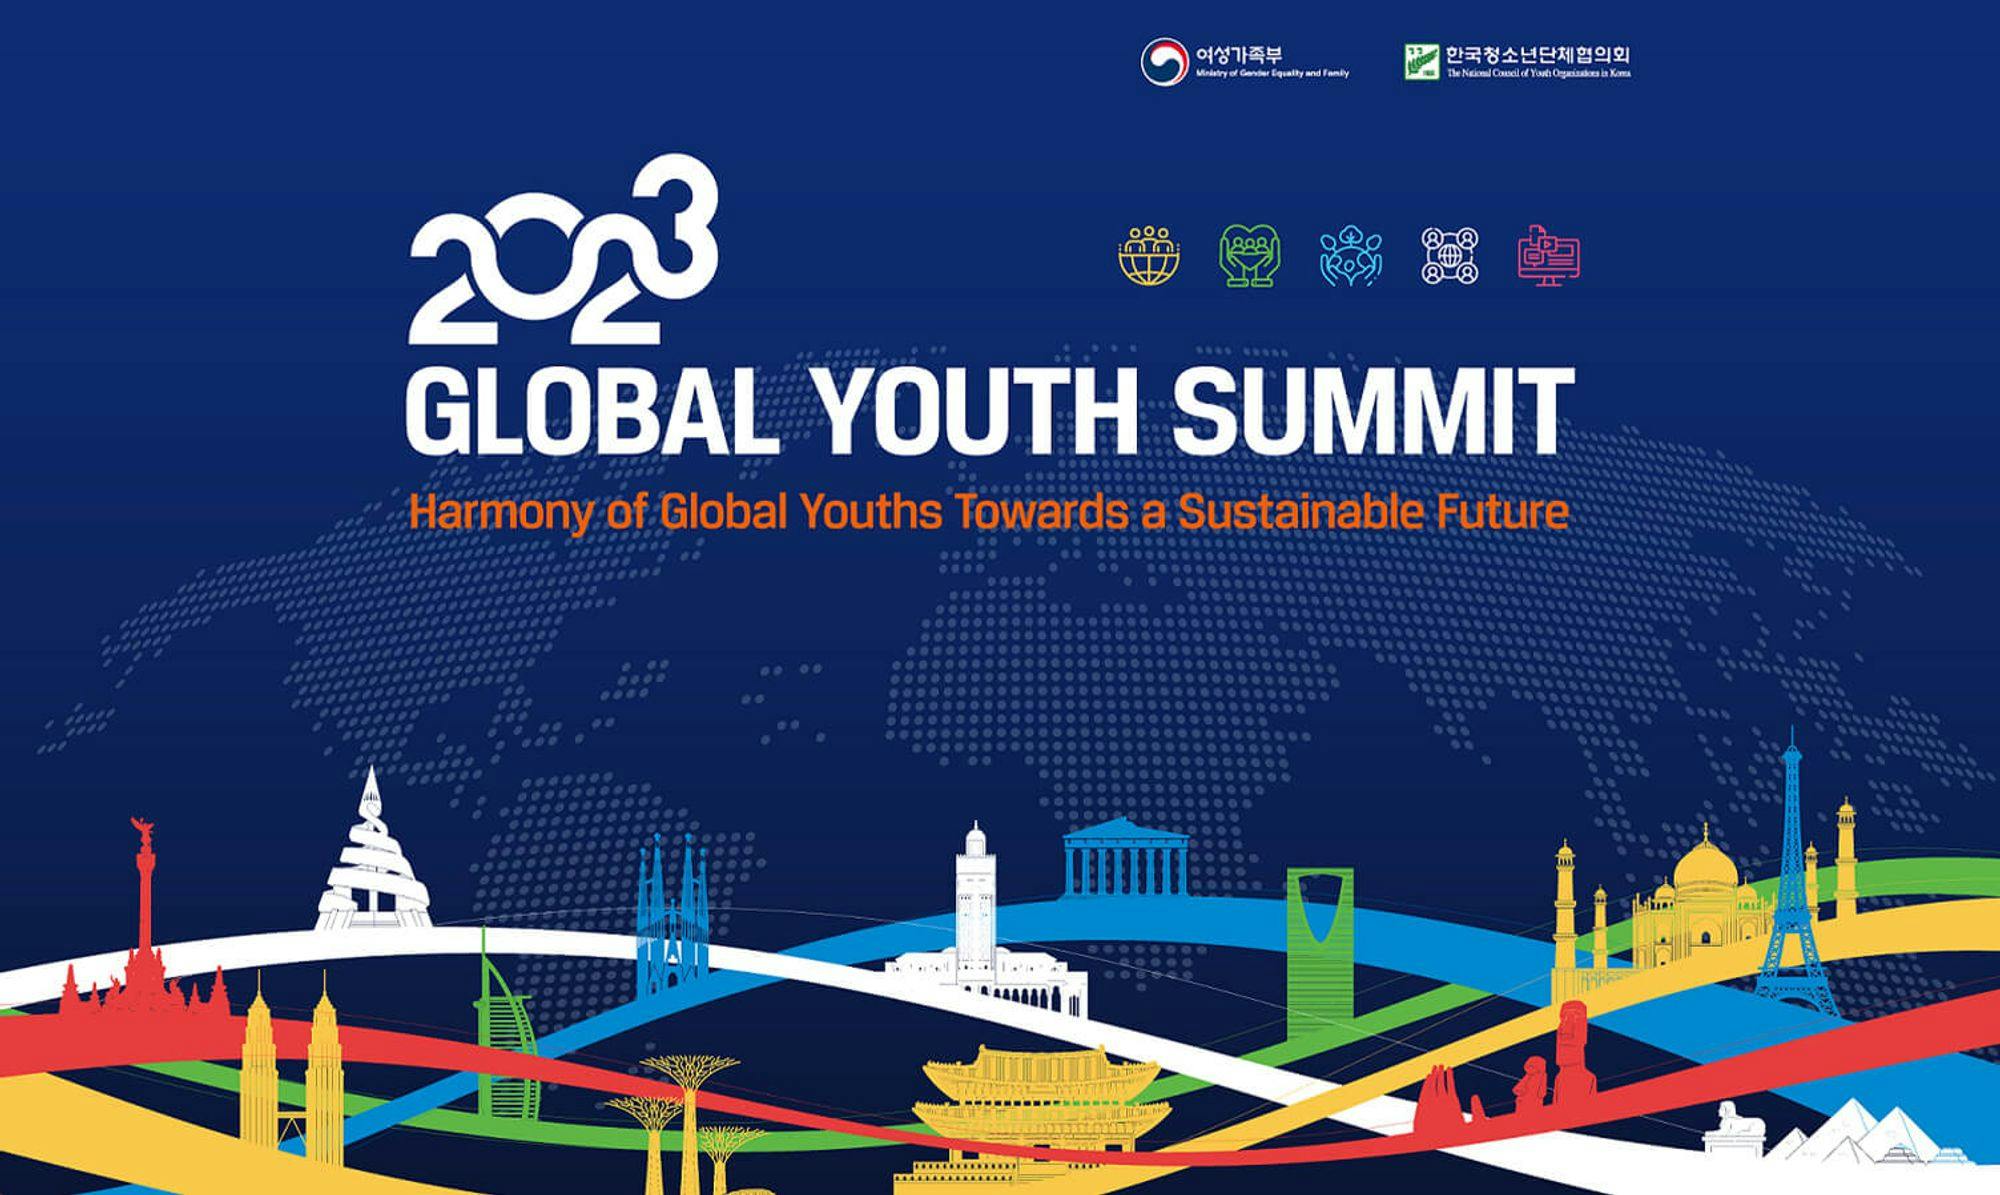 Representing Korea at the 2023 Global Youth Summit